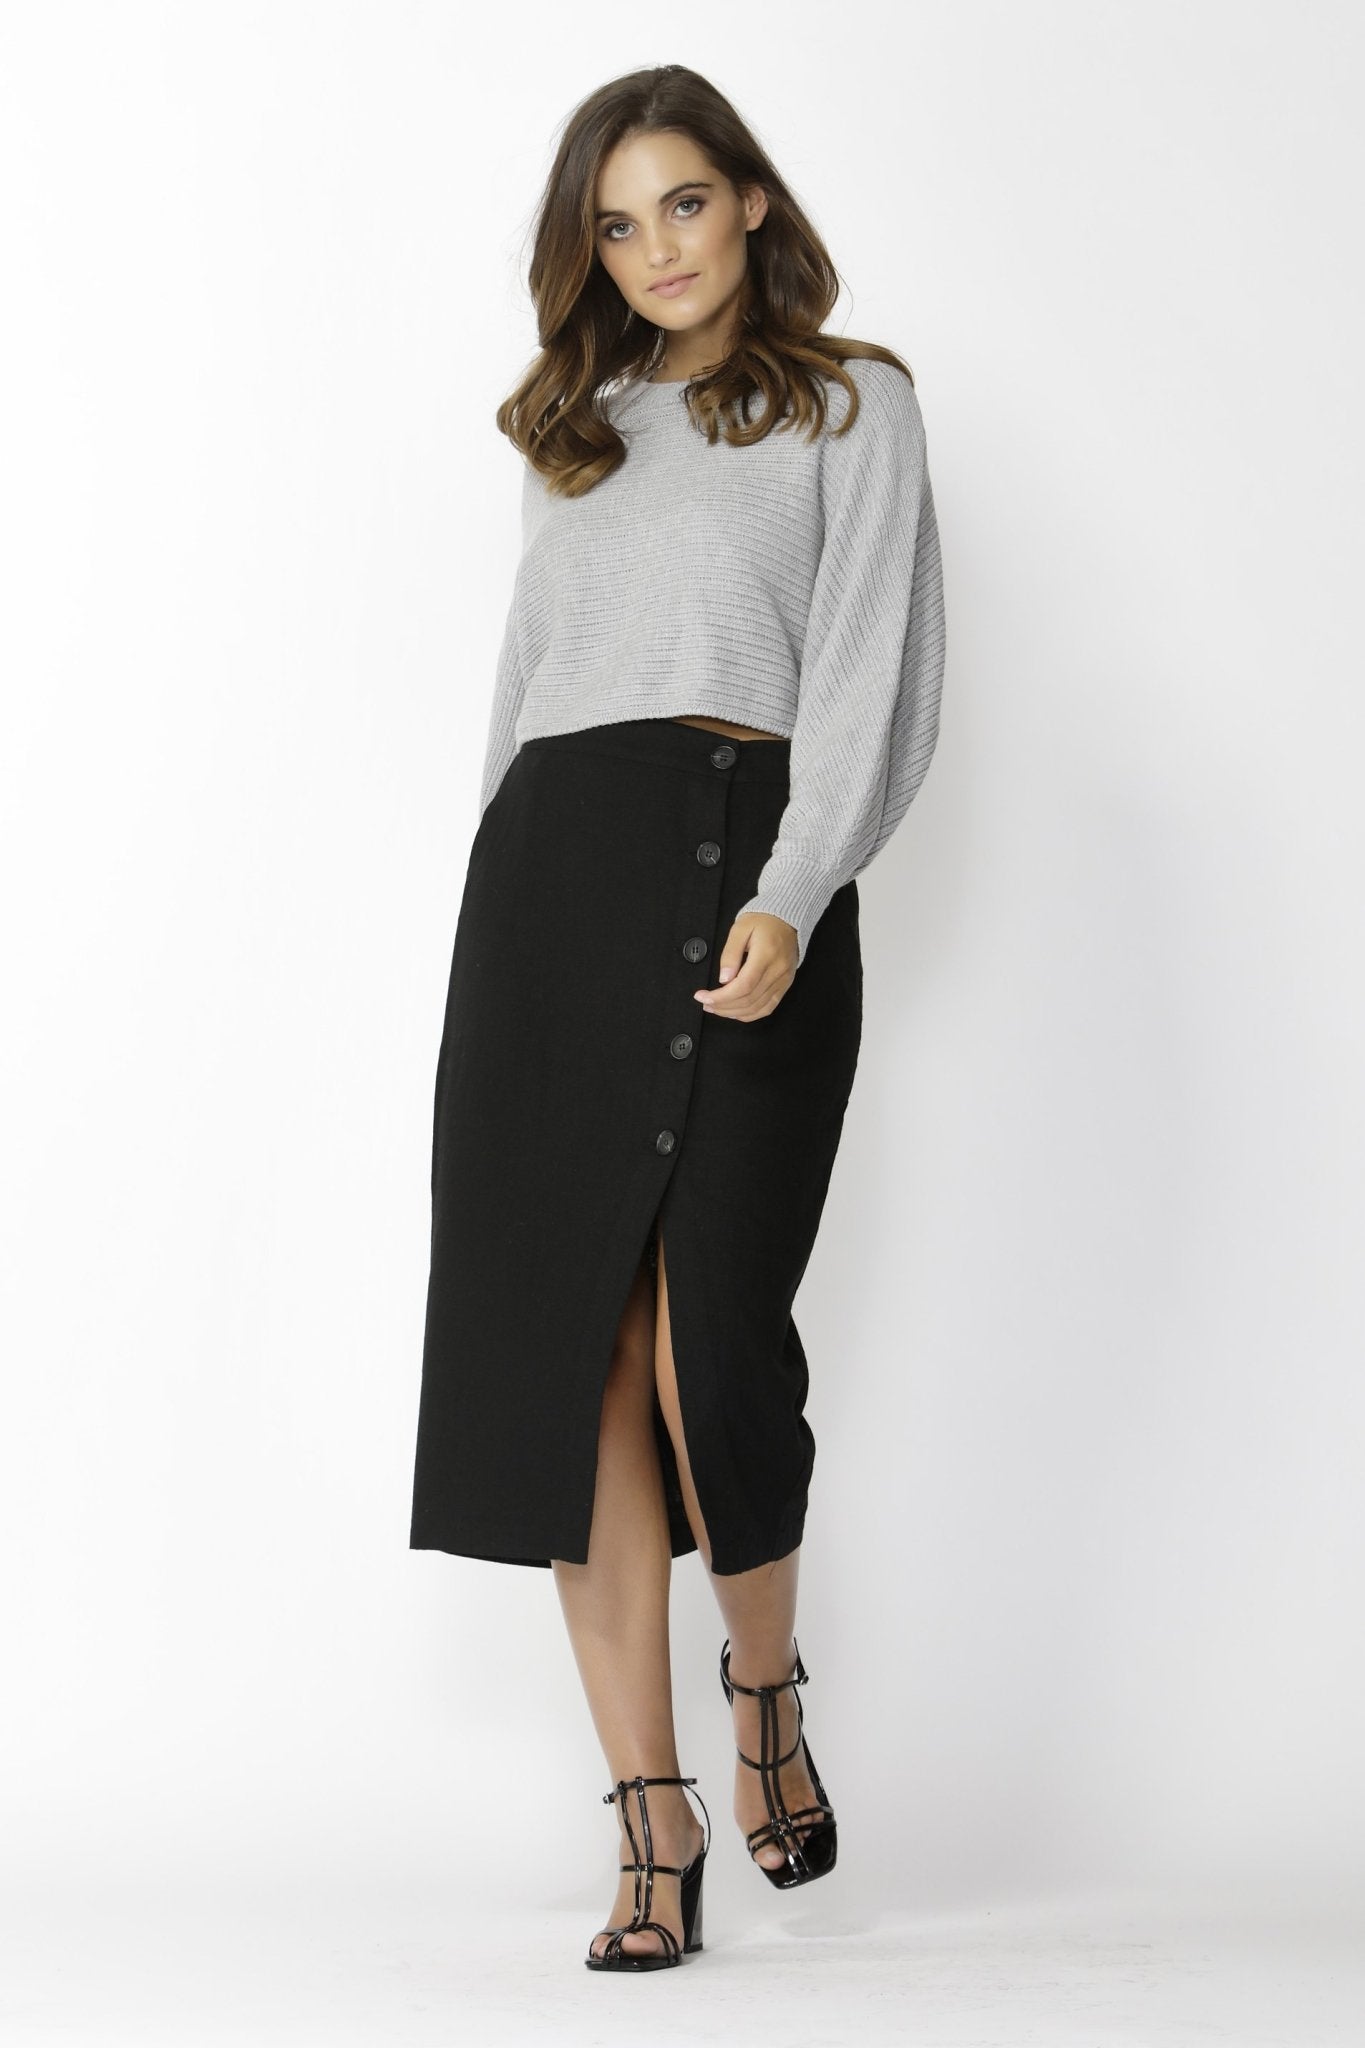 Sass Independence Cropped Knit in Grey Marle - Hey Sara